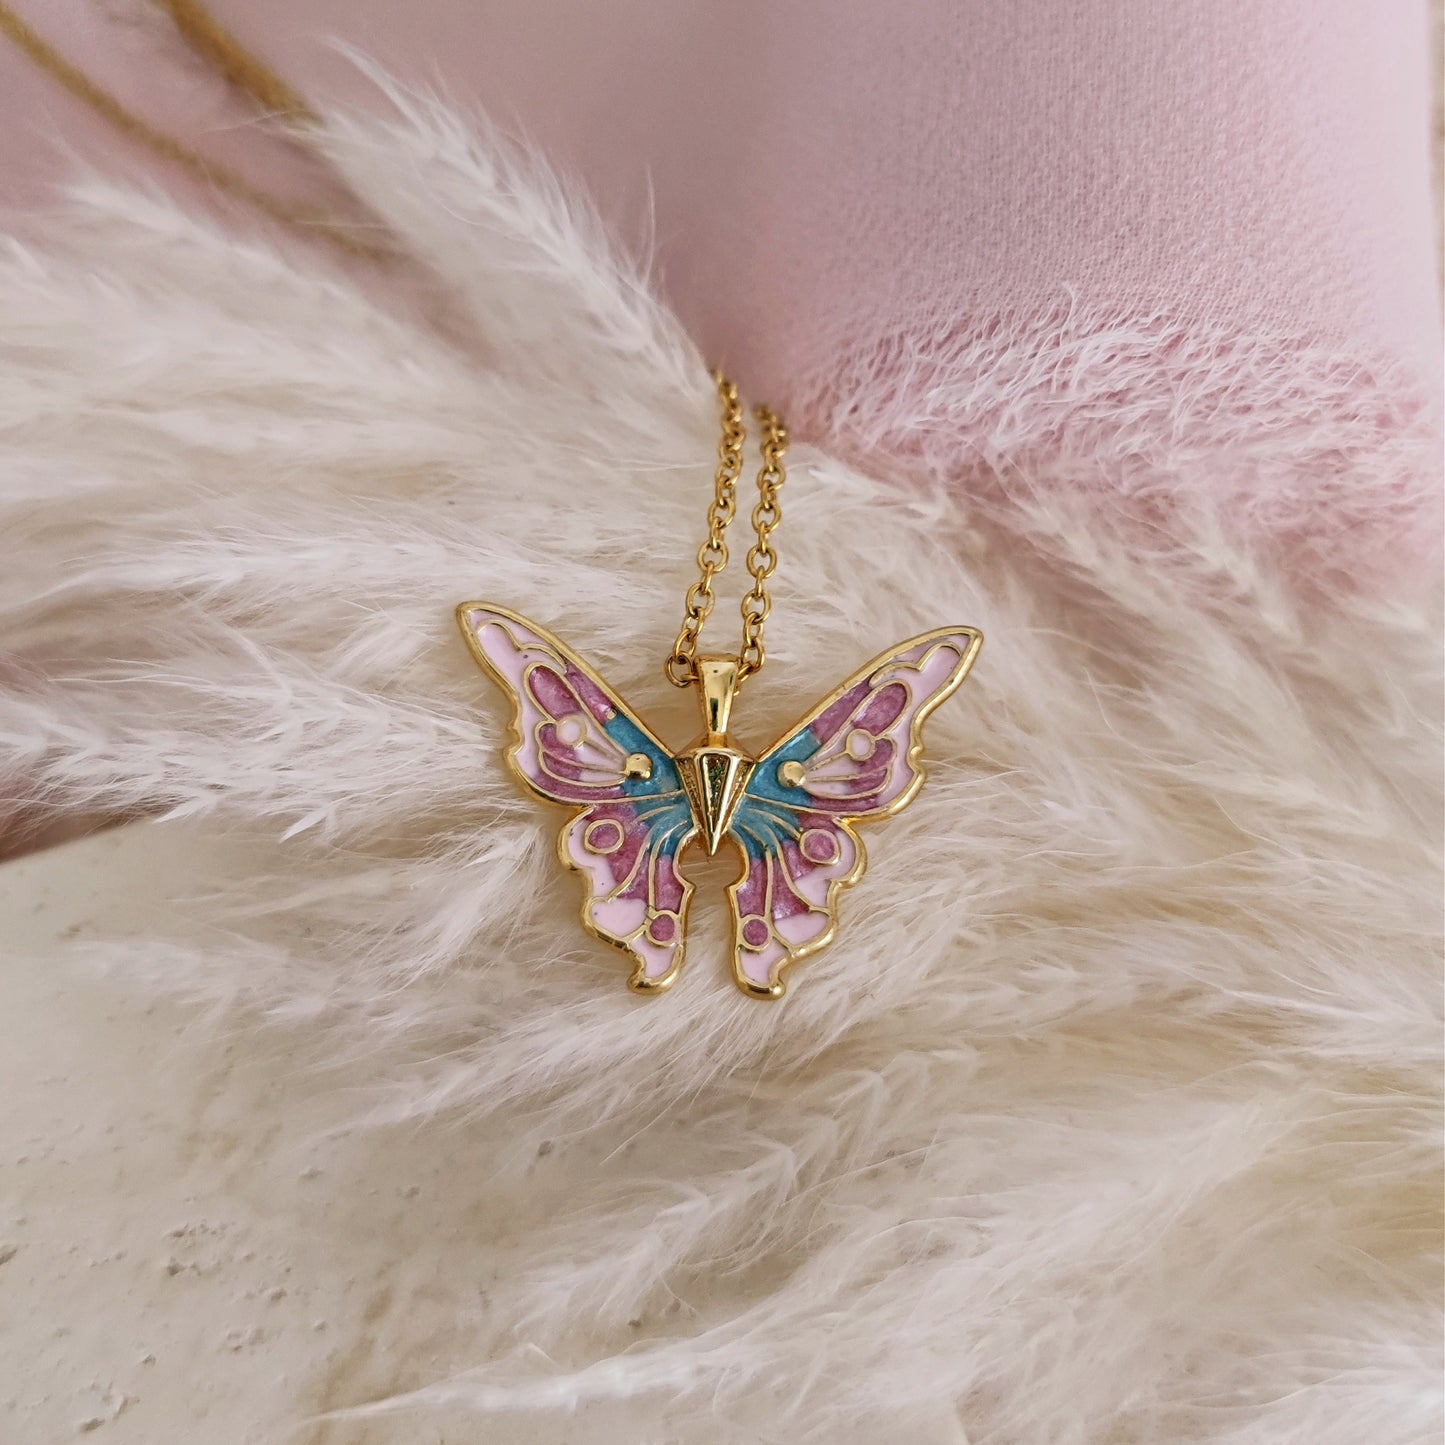 Fairy Pearls Princess Necklace, Mariposa and Pearls Necklace, PrincessCore Butterfly and Pearls Necklace, Coquette Aesthetic, Fairy Princess 